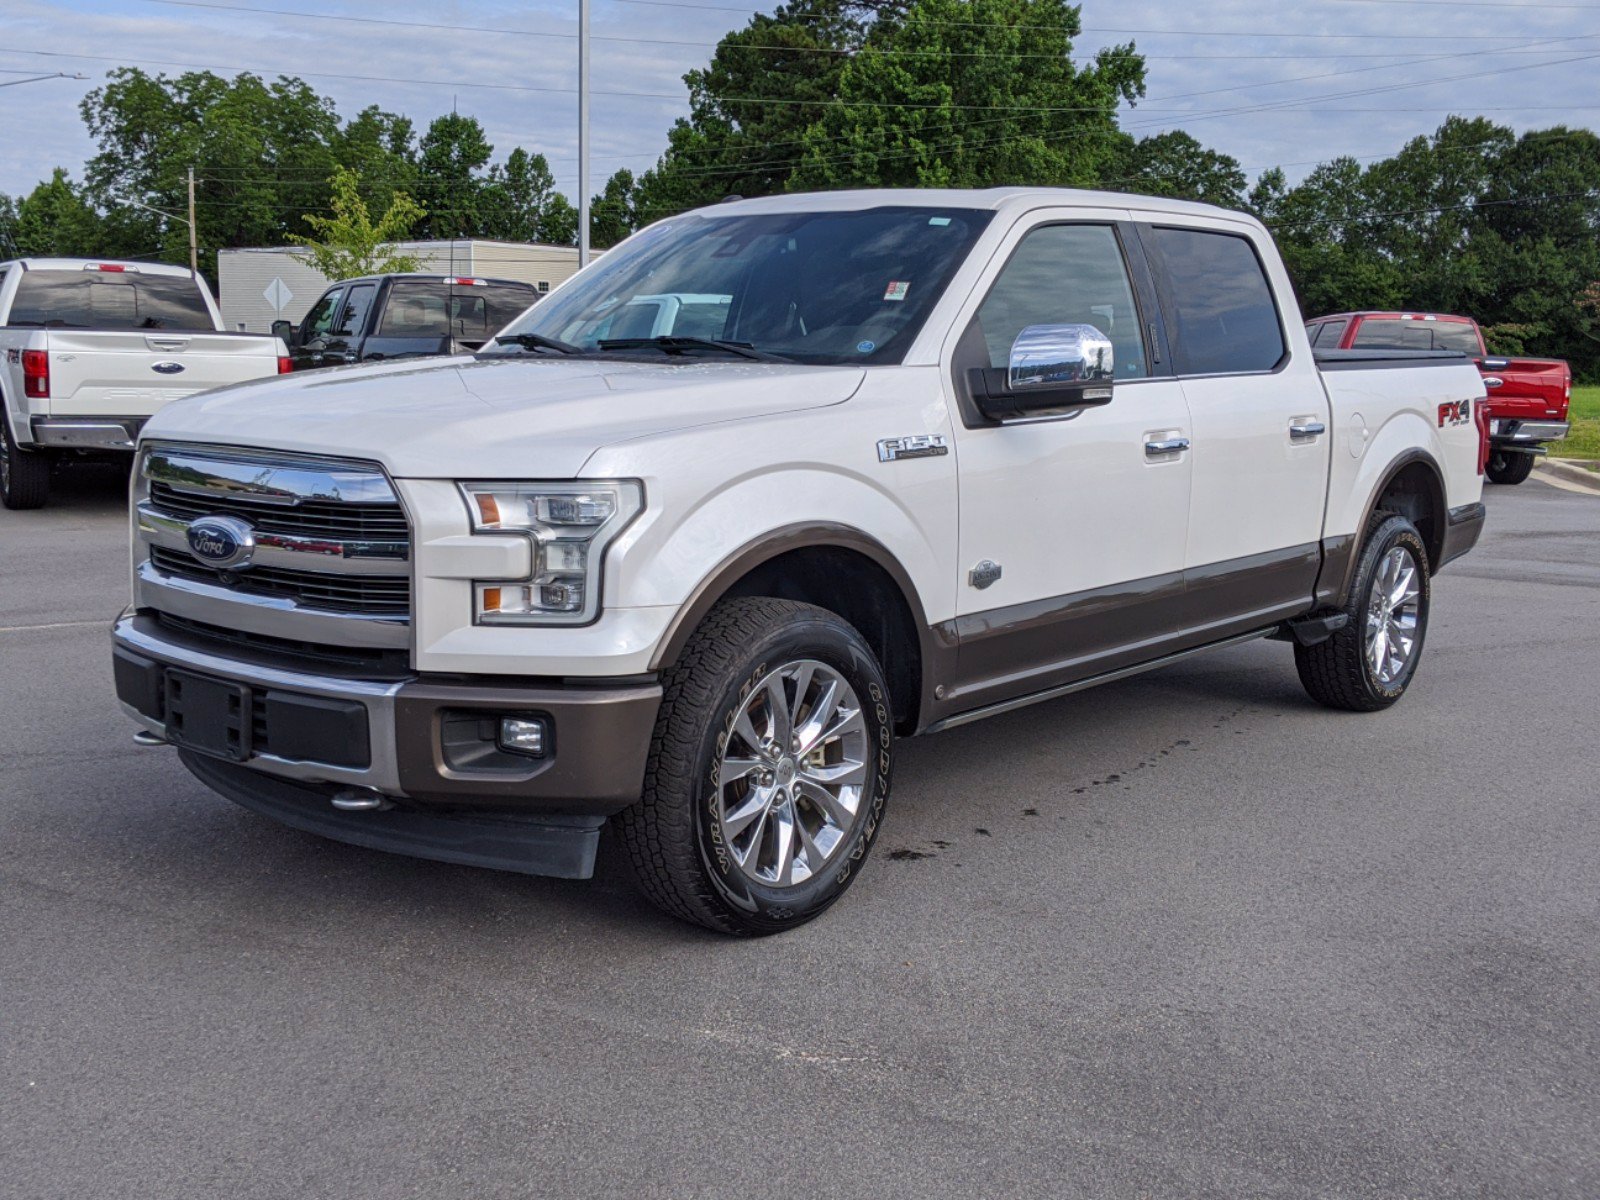 PreOwned 2017 Ford F150 King Ranch With Navigation & 4WD